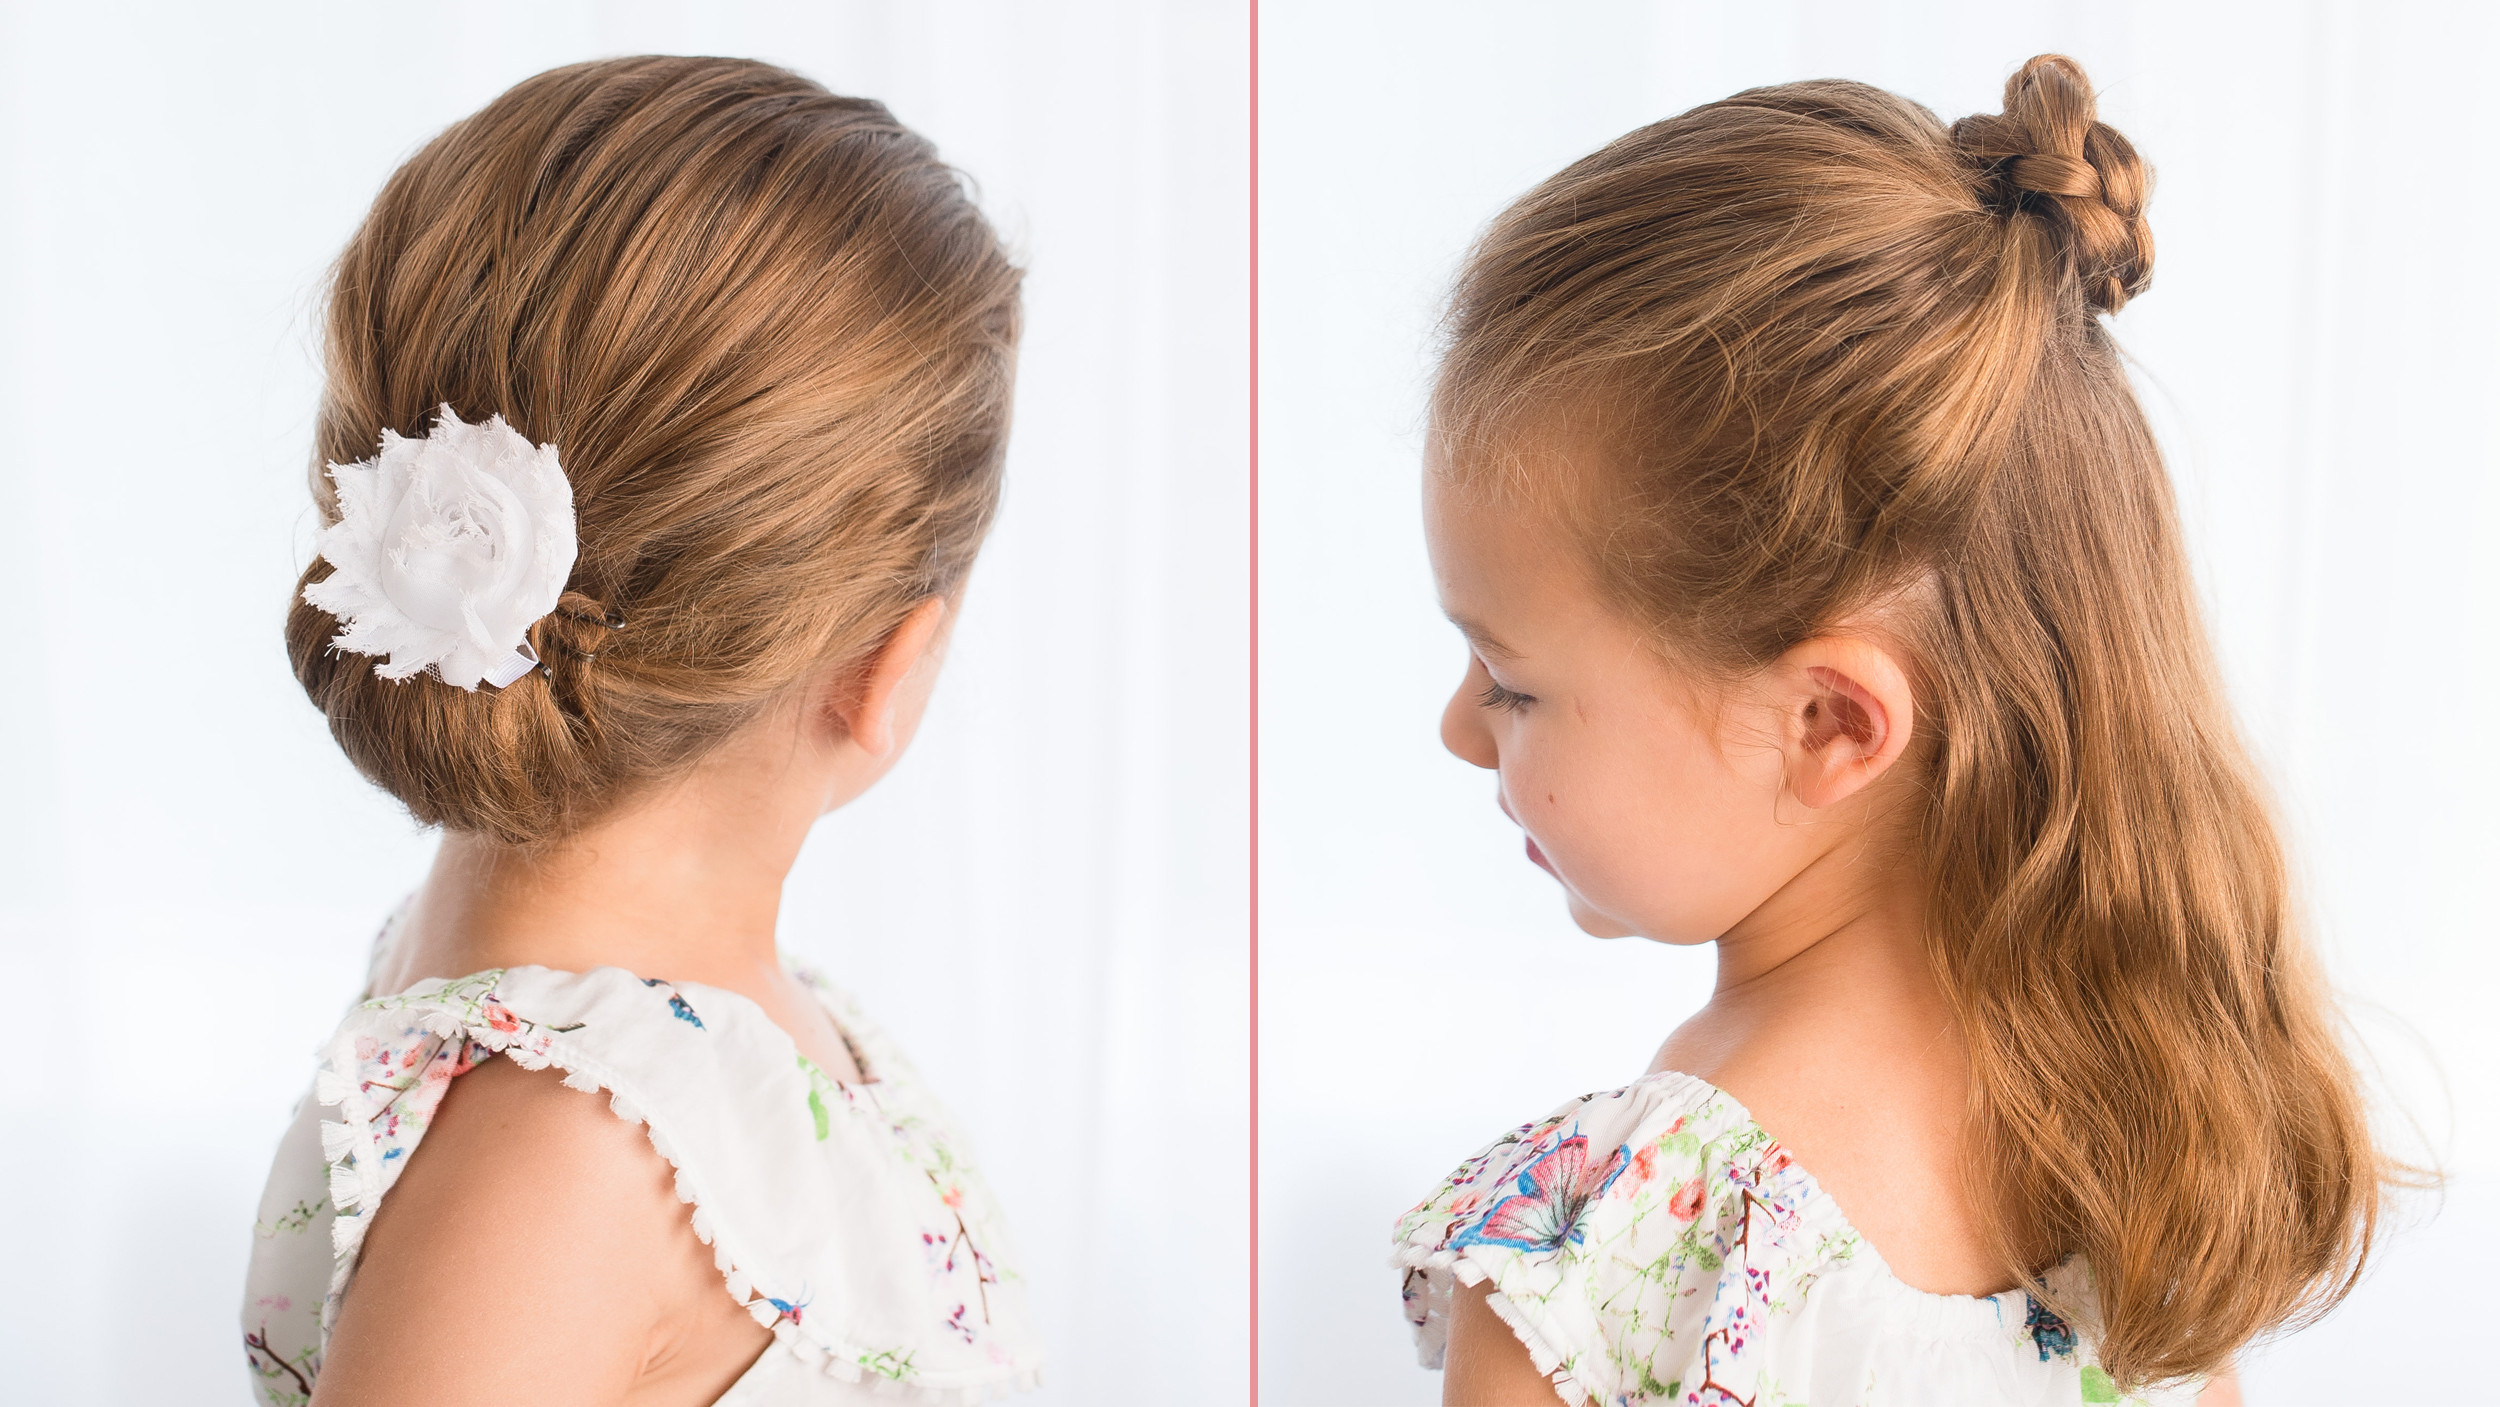 Hairstyle For Girls Kids
 Easy hairstyles for girls that you can create in minutes